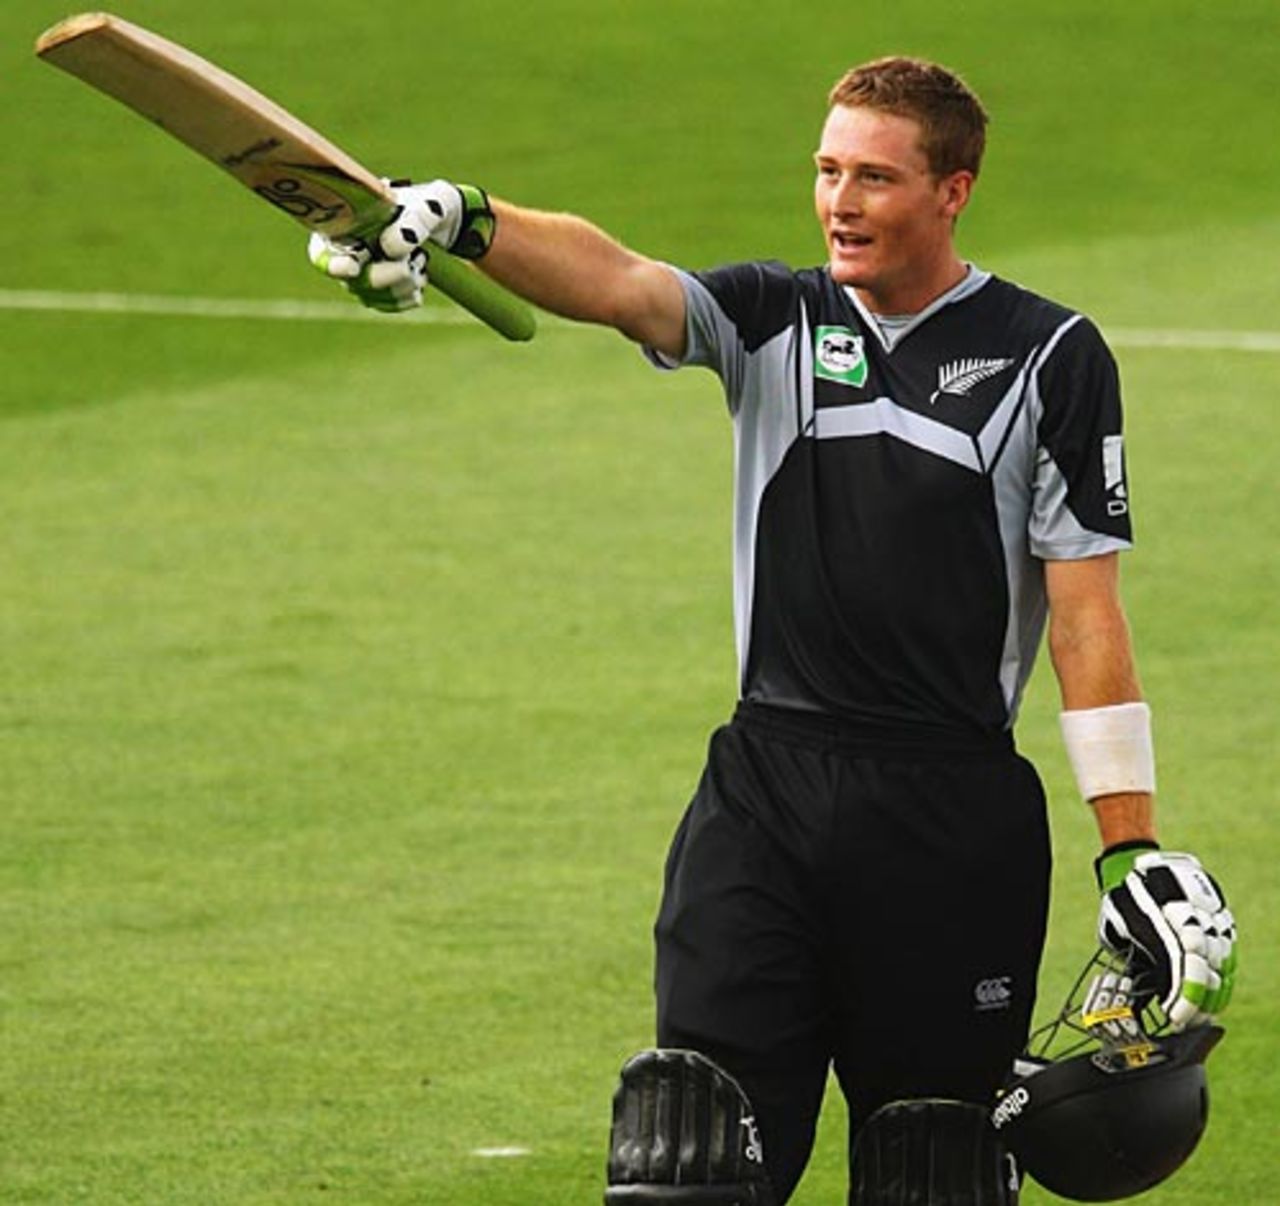 Martin Guptill raises his bat after reaching a century on debut, New Zealand v West Indies, 4th ODI, Auckland, January 10, 2009